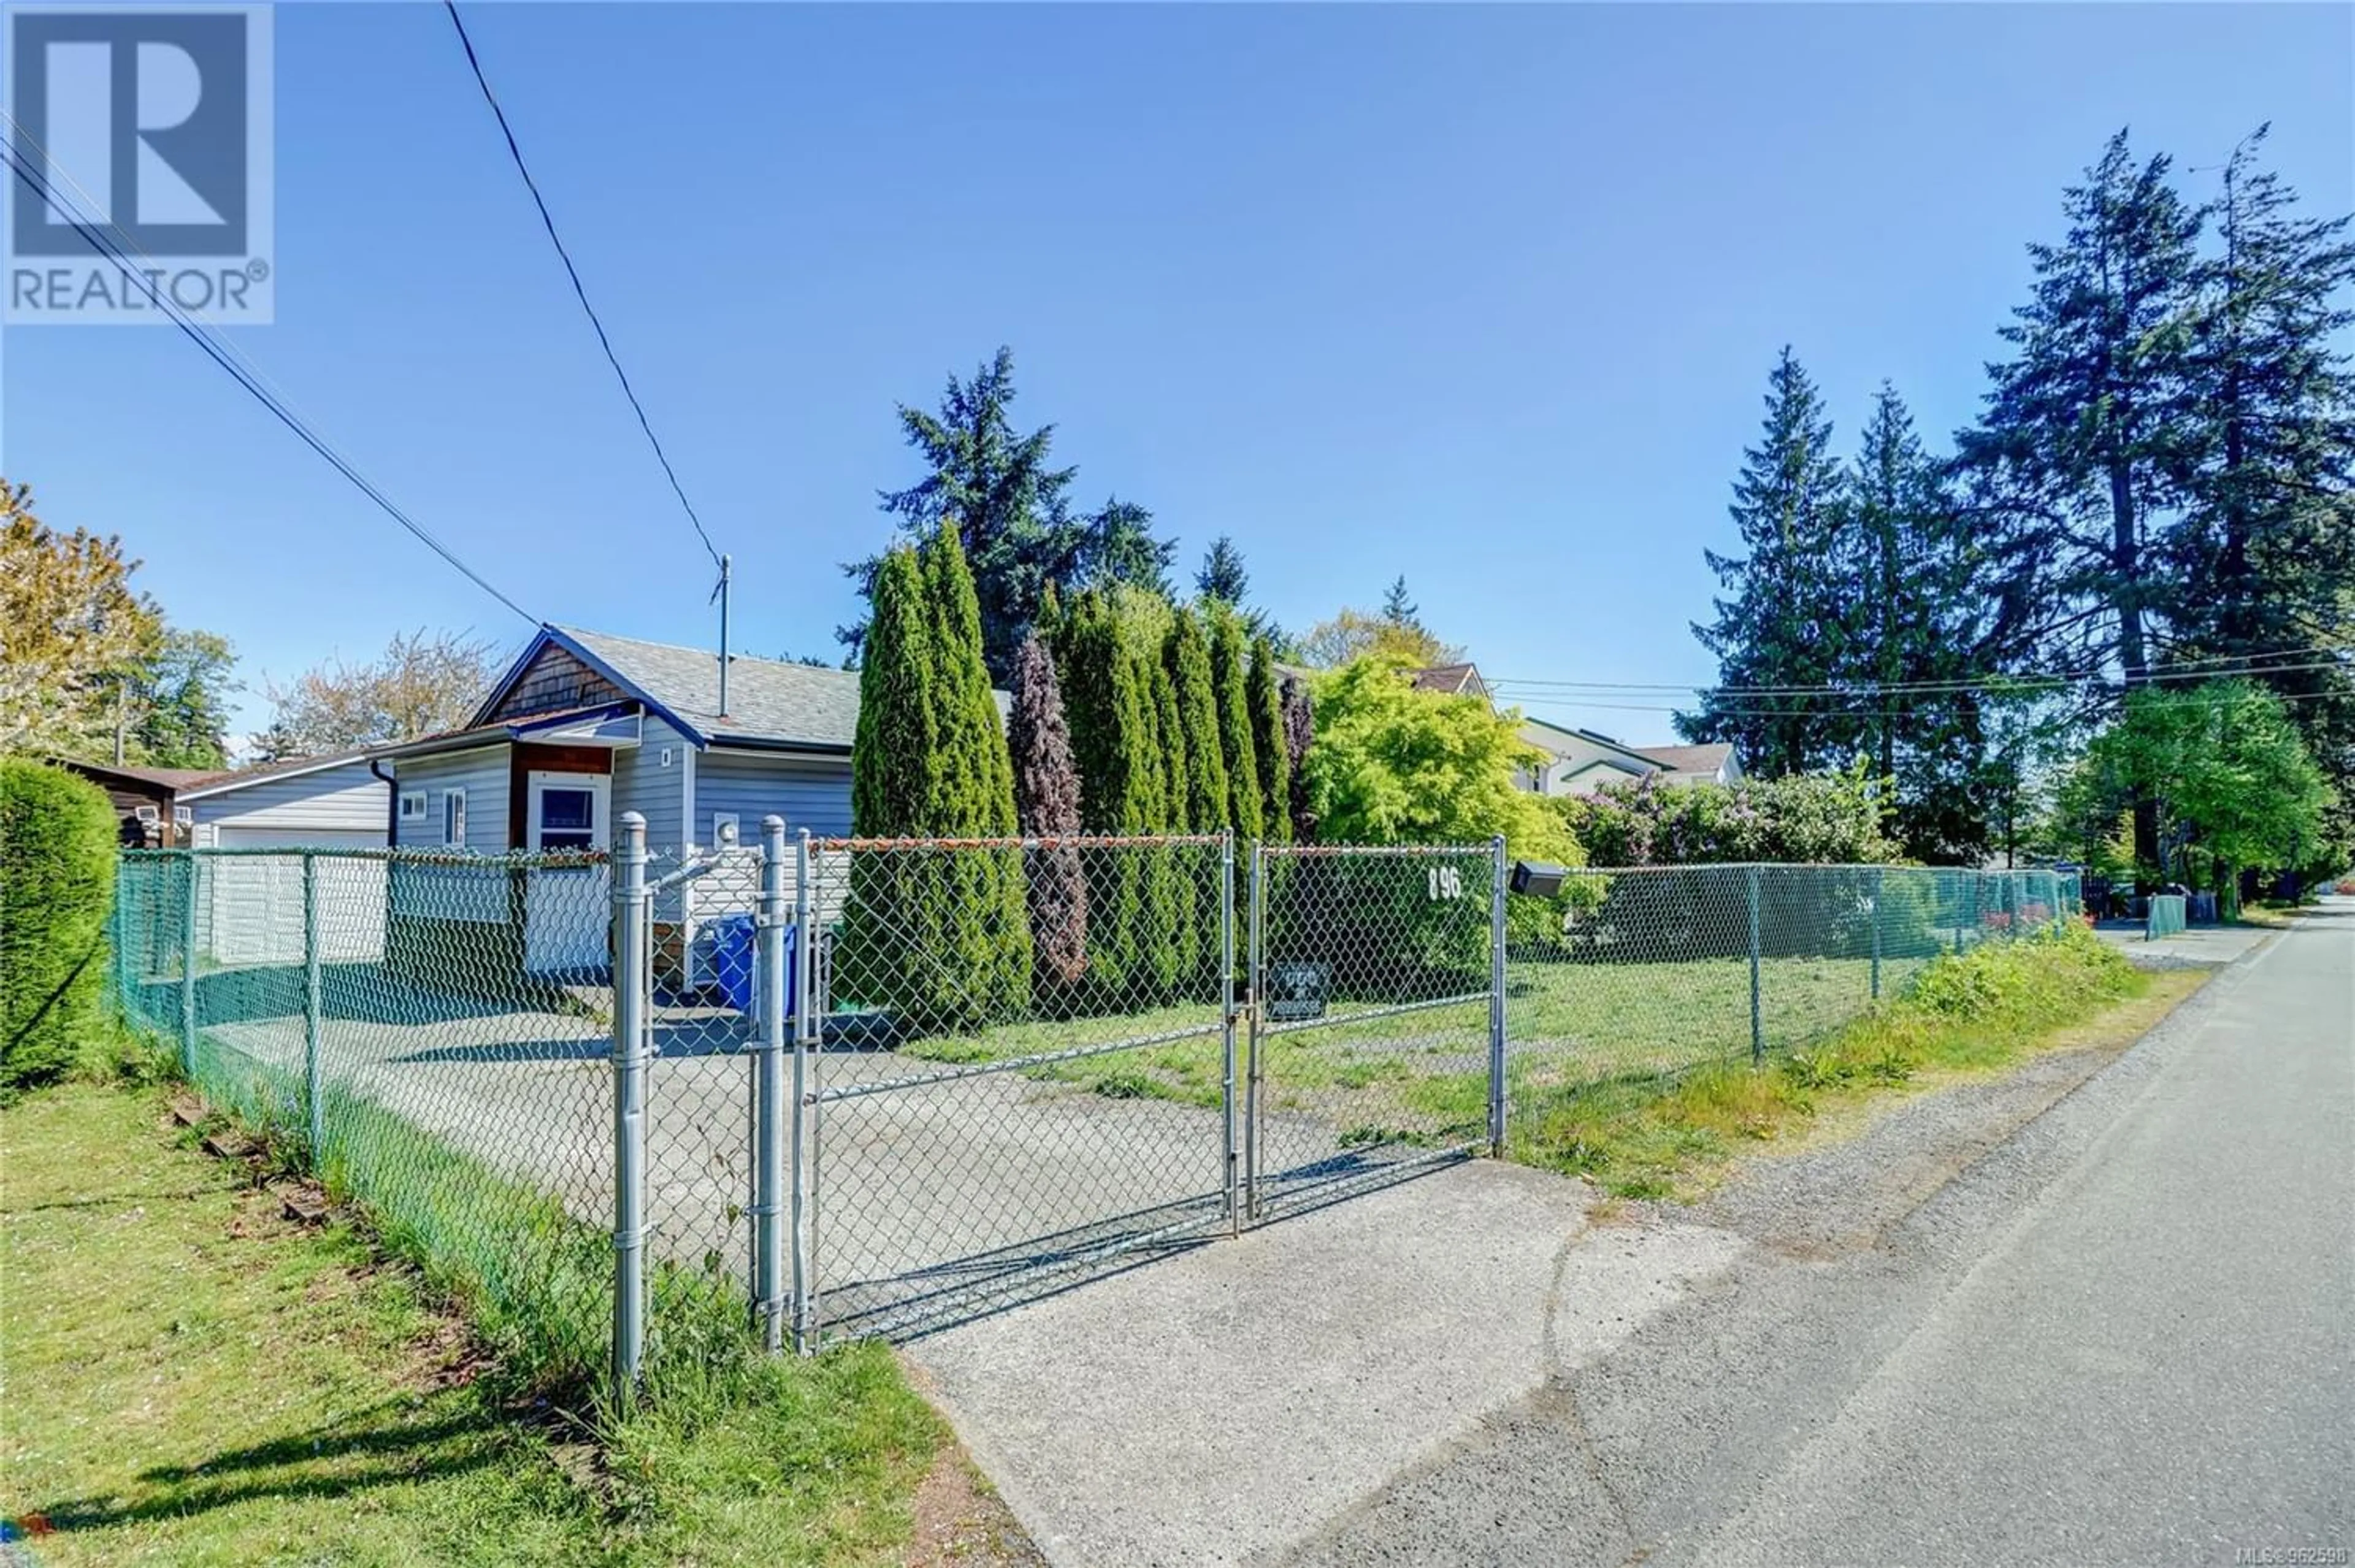 Fenced yard for 896 Townsite Rd, Nanaimo British Columbia V9S1L7